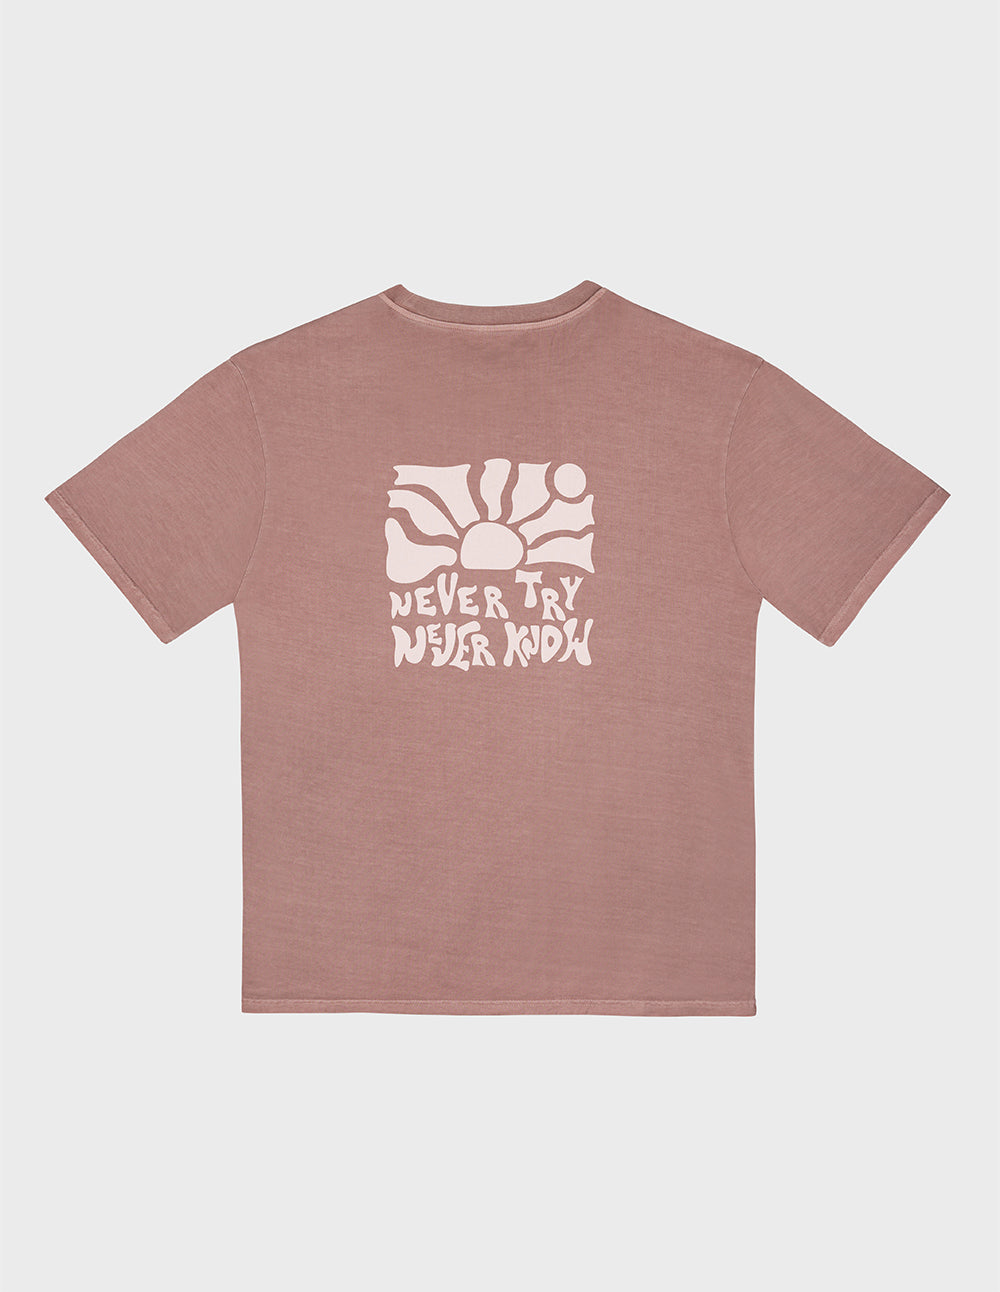 NEVER TRY CORAL CAMISETA